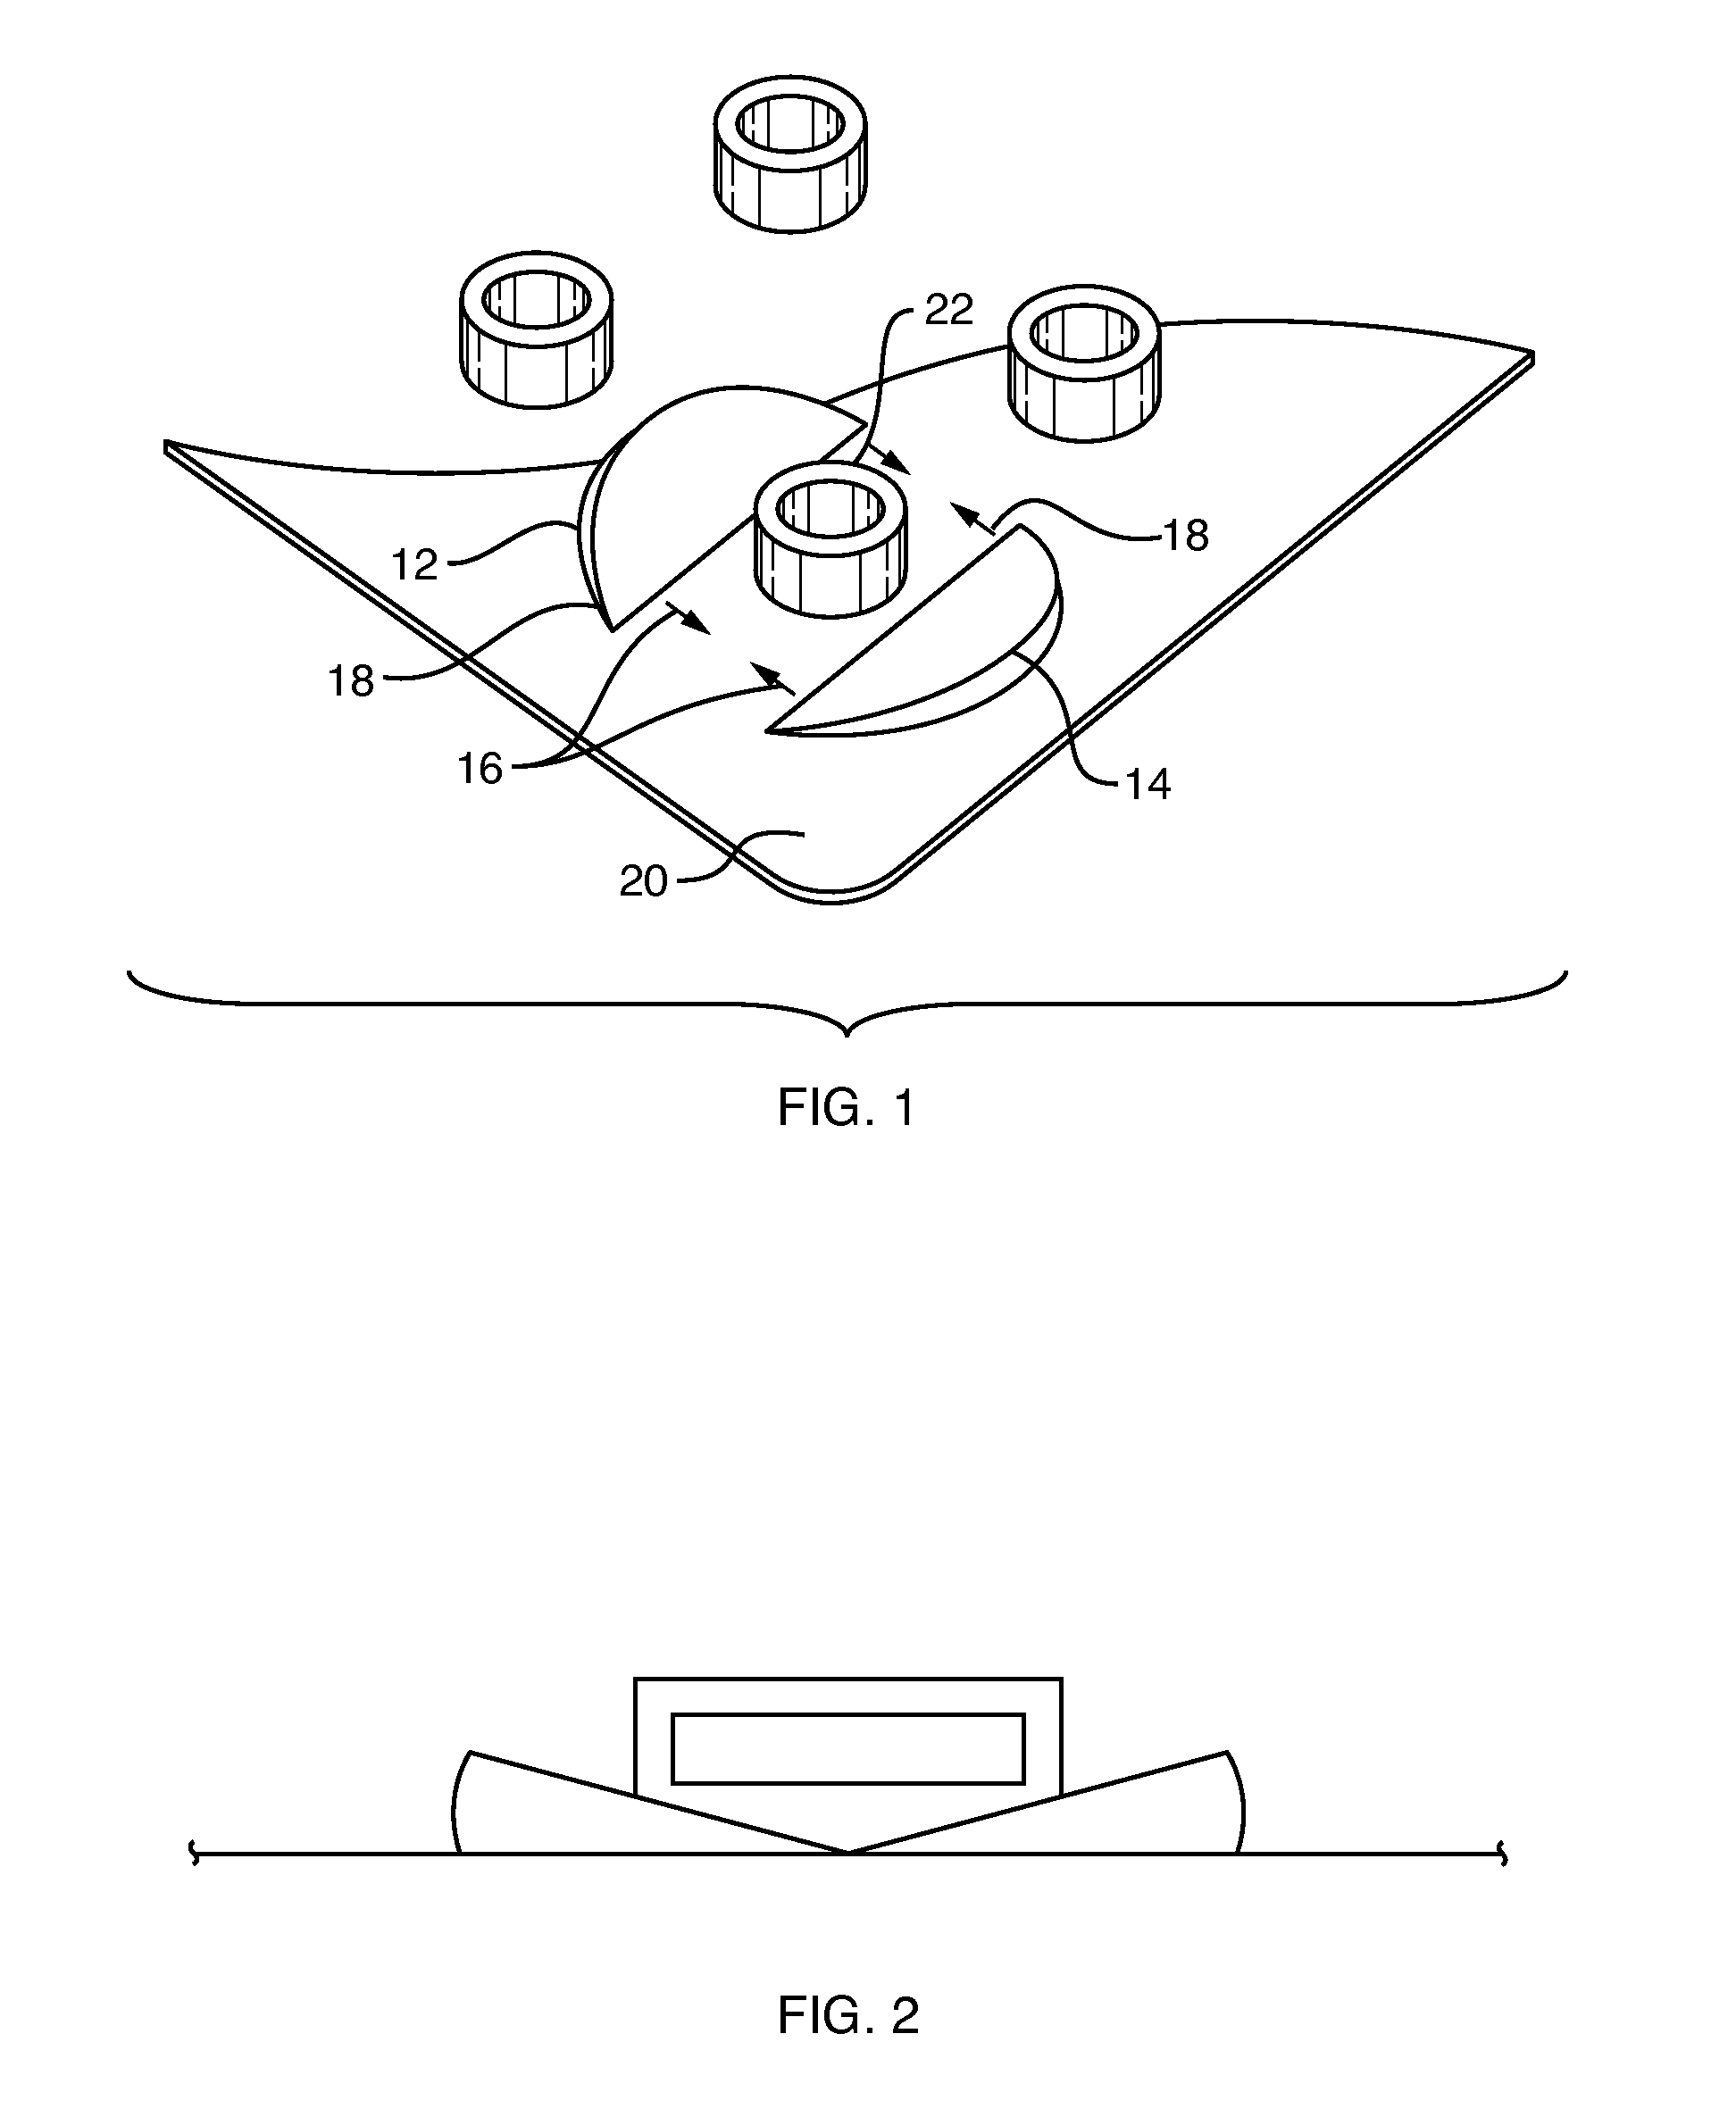 Method and device for dispensing articles from blister packs